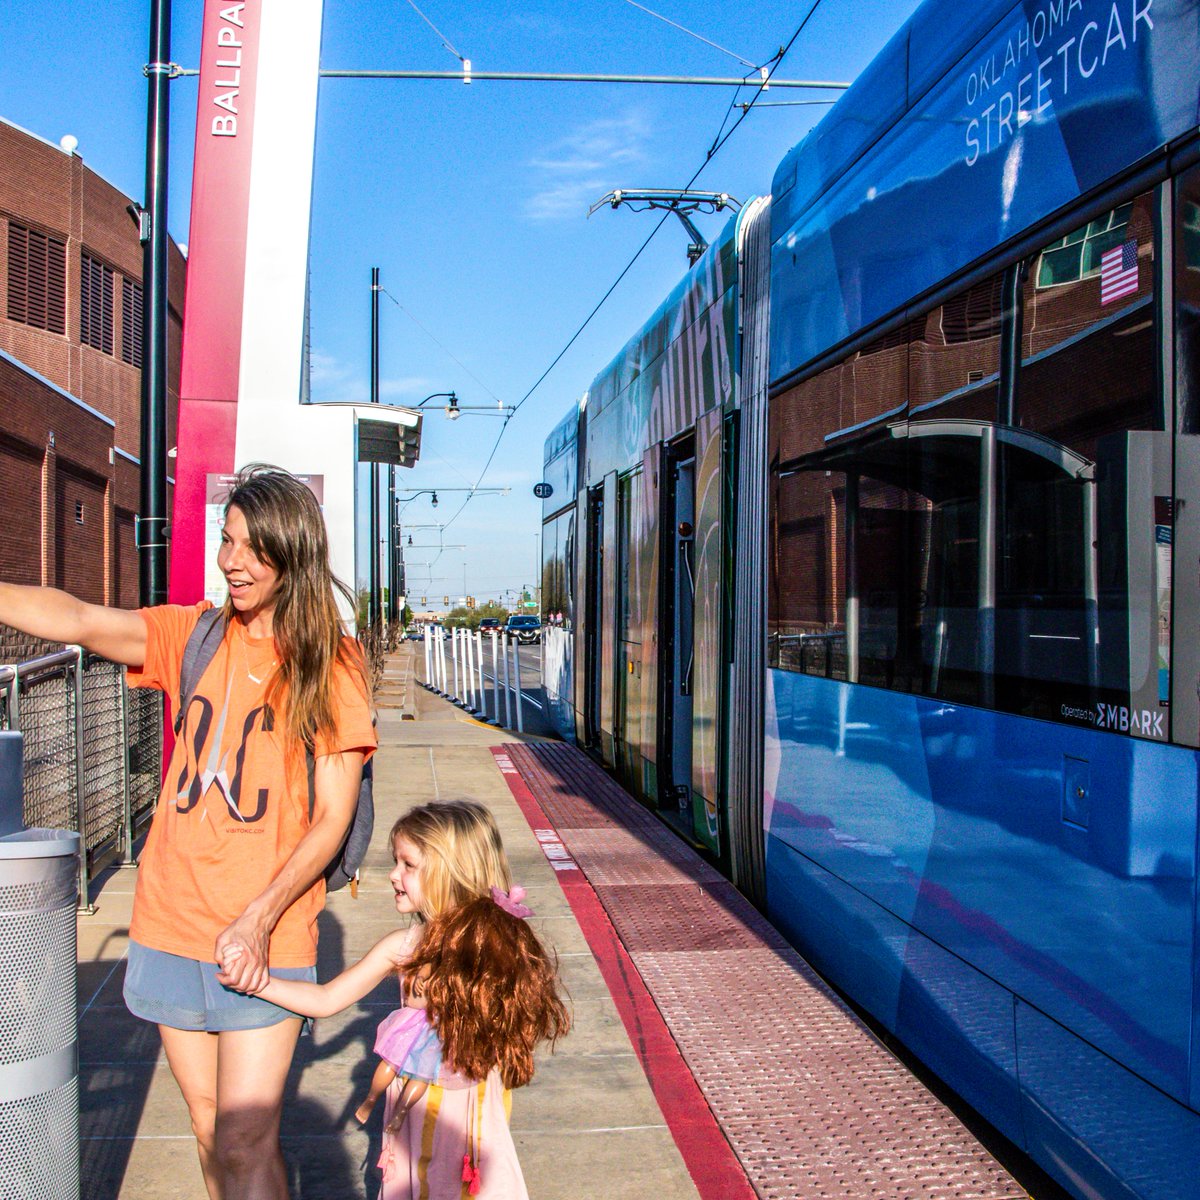 Parents, unite and rejoice! 🙌 Youth aged 18 and under can enjoy free rides every day on the streetcar, @RAPIDbrt, and @EMBARKok buses through our Haul Pass program. Show your kiddo a new facet of their city and #trytransit!